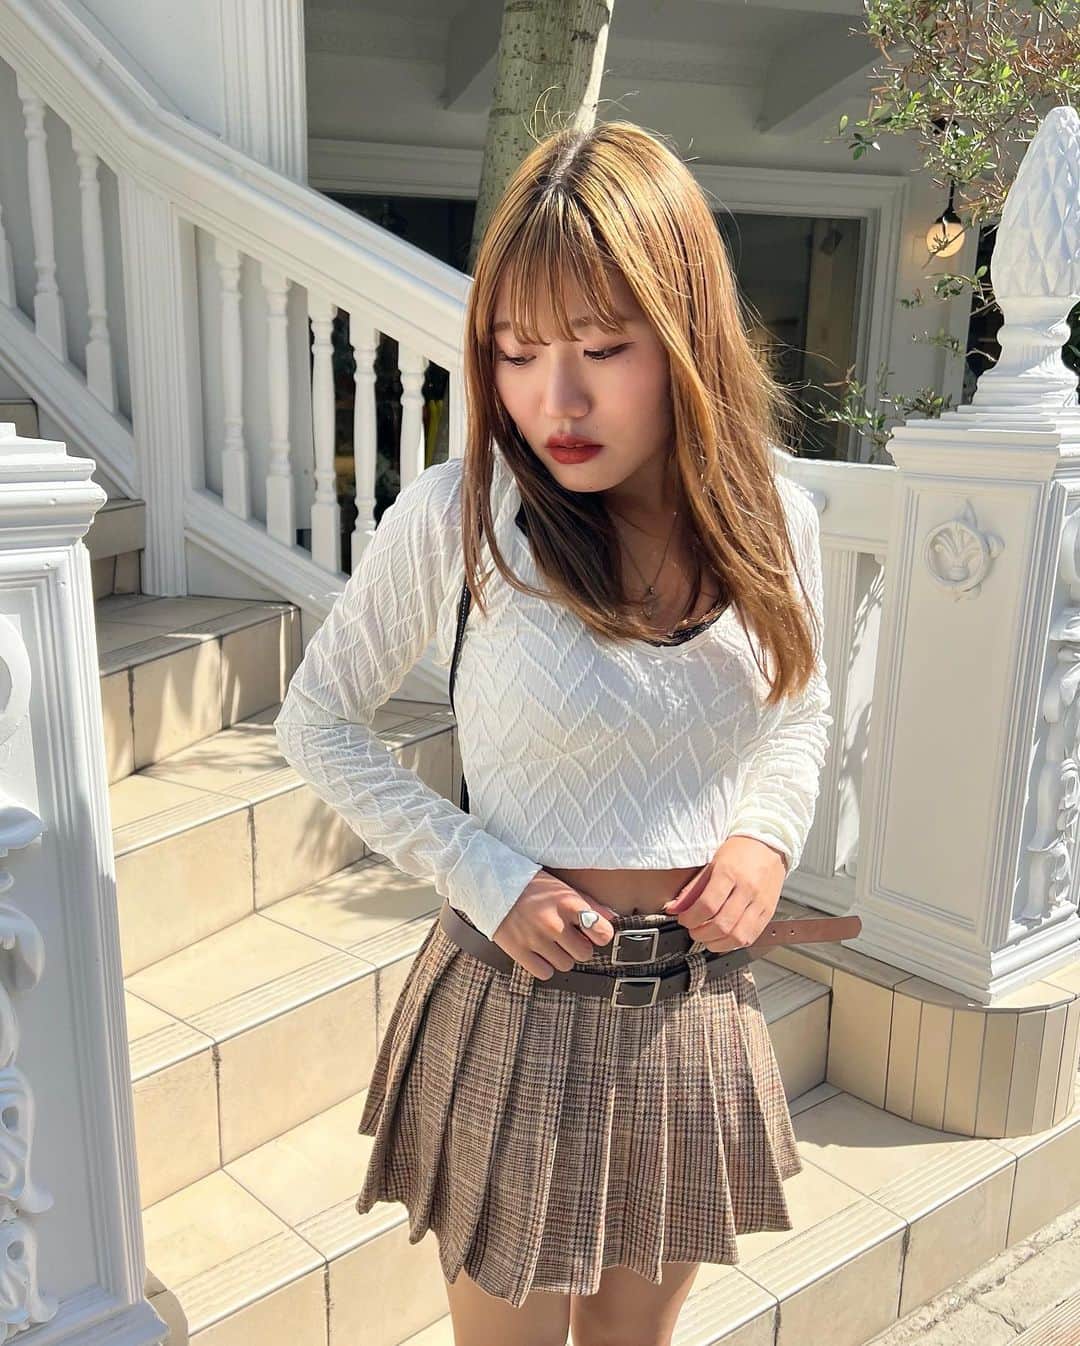 NADIAのインスタグラム：「🤎🦢new in 🦢🤎  ○Bolero,camisole set tops color:white,brown,black ¥6,990(tax in)  ○W belt pleats skirt color:checkbrown,black size:S,M ¥5,190(tax in)  ○Butterfly stitch bag ¥5,590(tax in)  その他アイテムもNadiaのものになります。皆様のご来店心よりお待ちしております🎀  #nadia#harajuku#tokyo  #fashion#autumn」